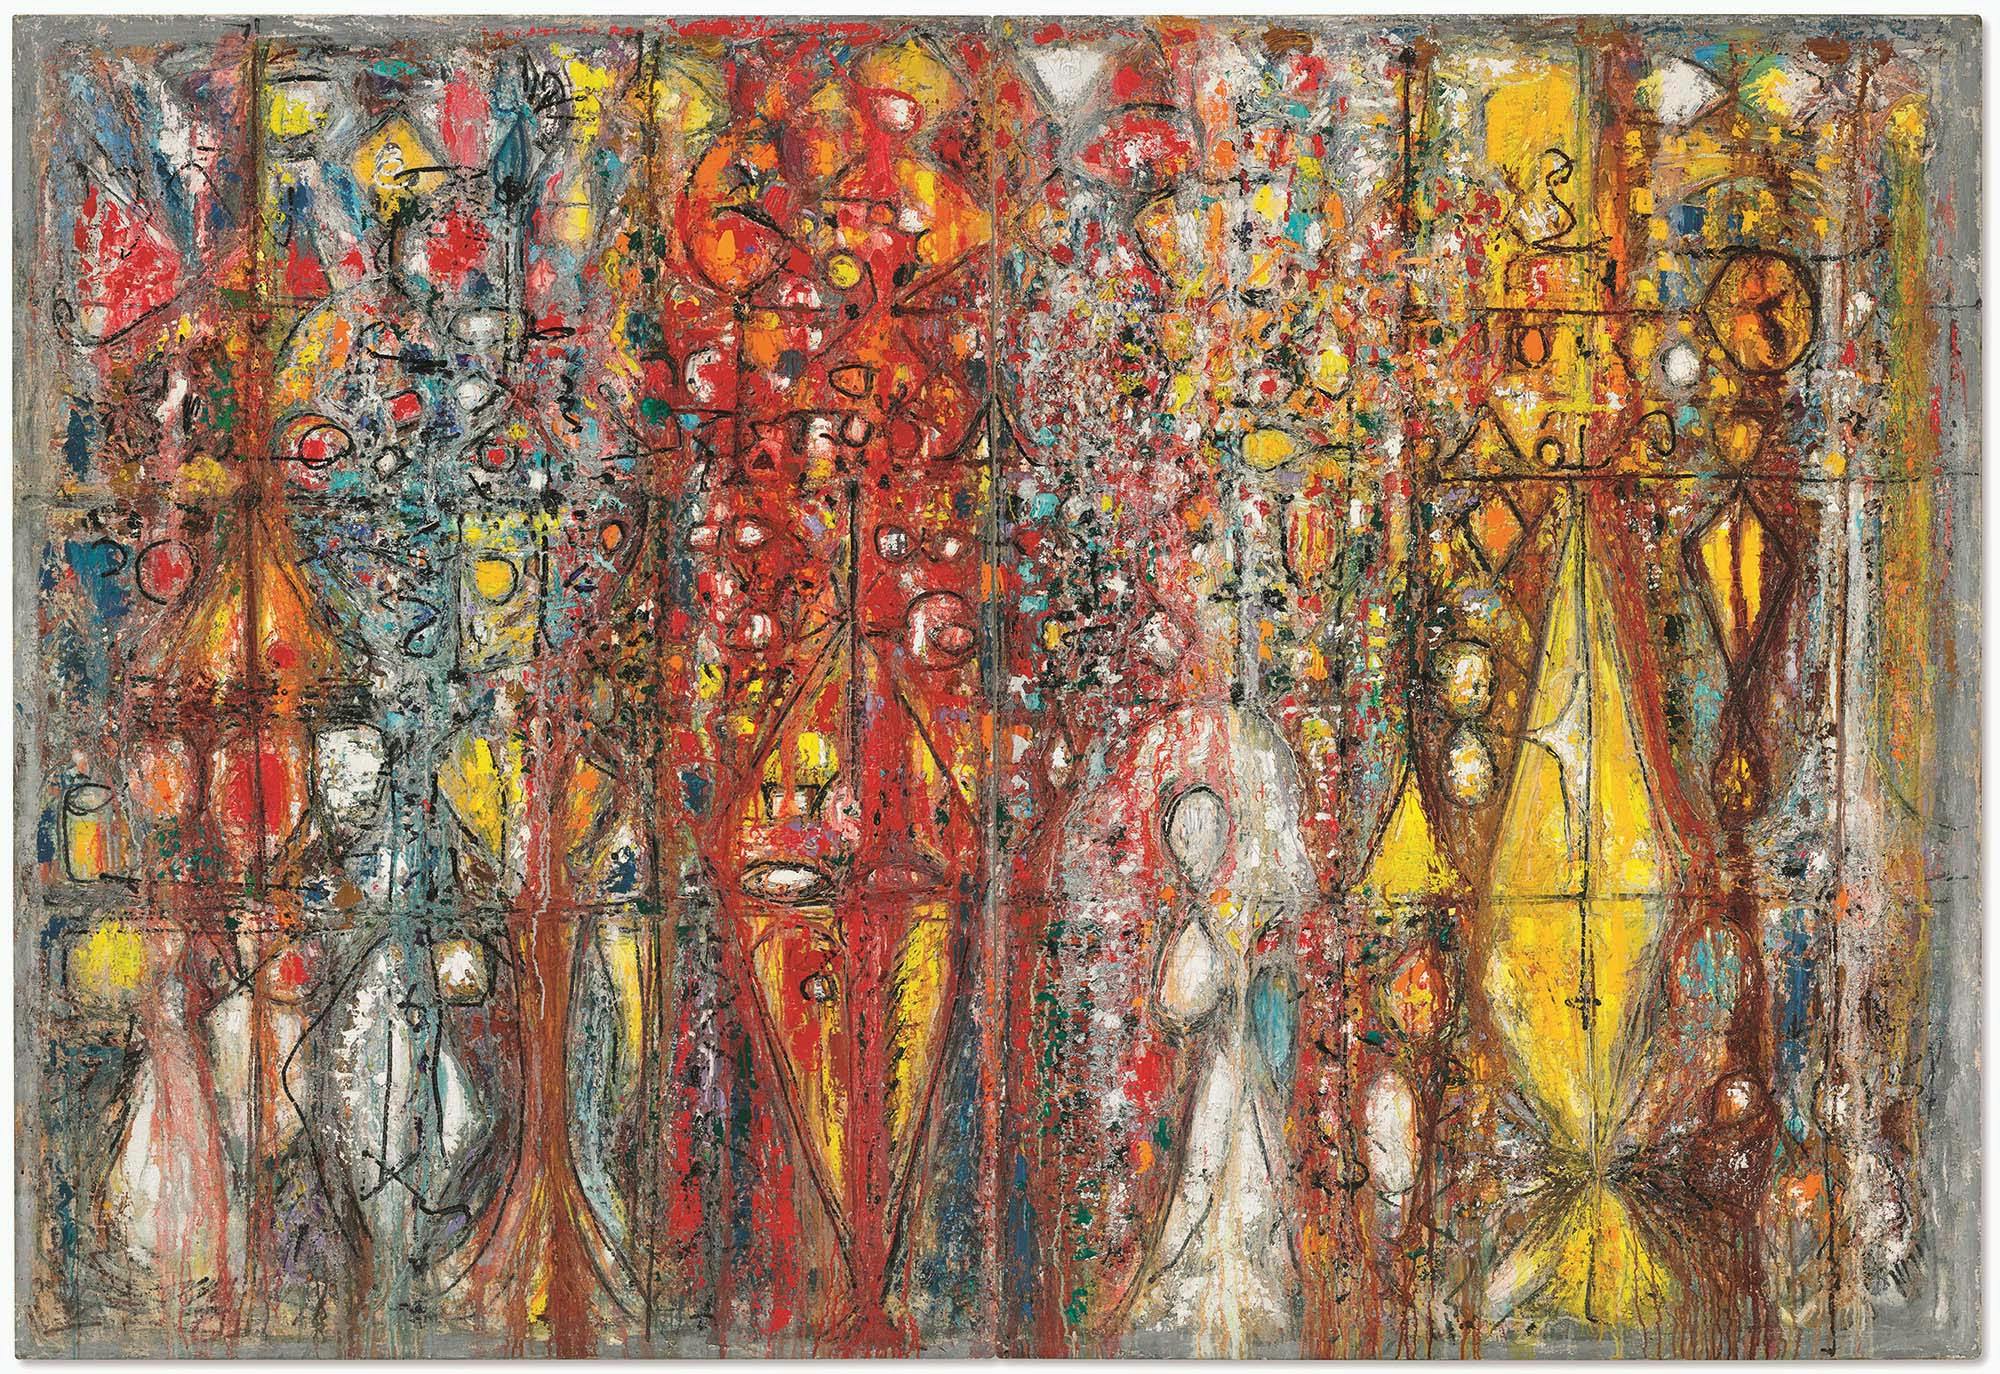 _Blood Wedding_, 1958, oil on linen, 72 x 112 in. (182.9 x 284.5 cm) Diptych
 – The Richard Pousette-Dart Foundation